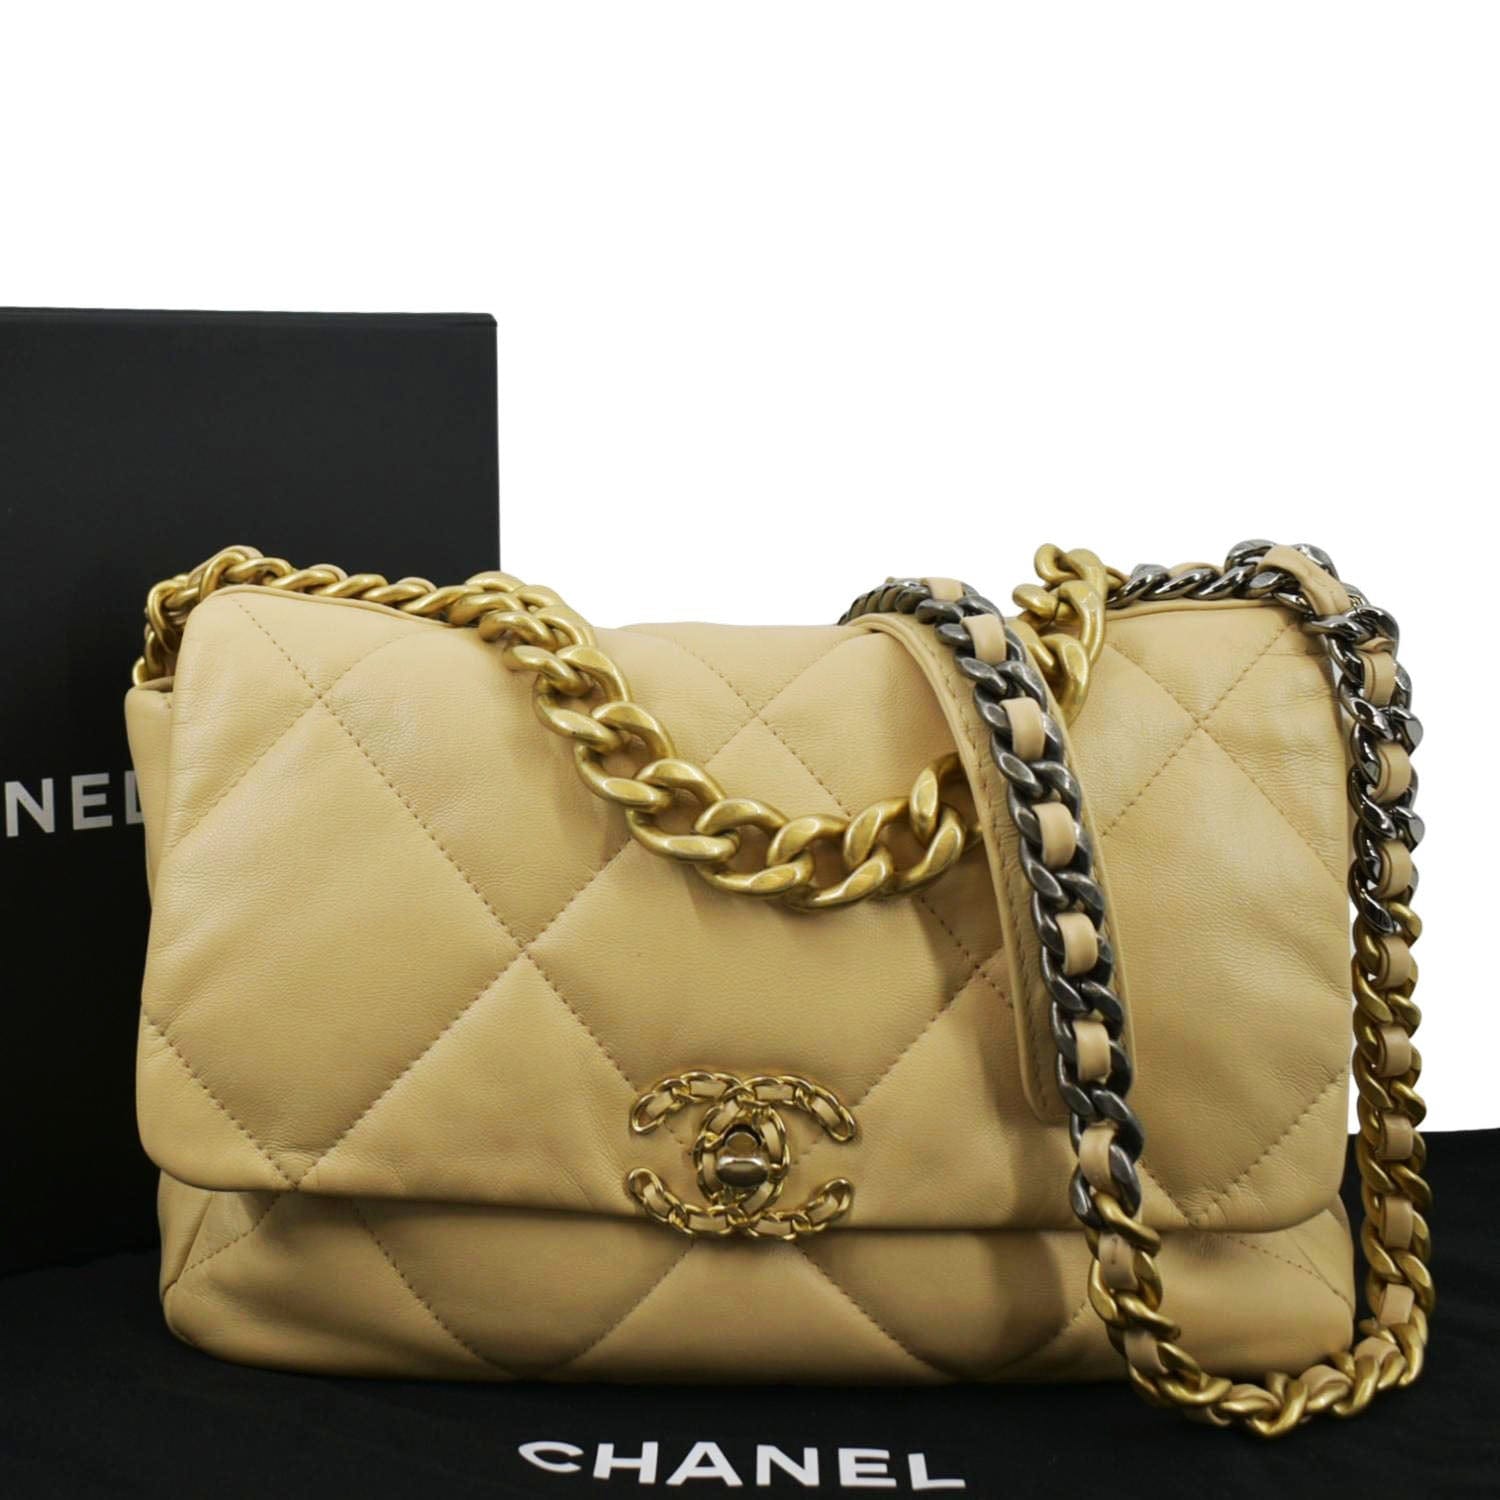 WHAT'S IN MY BAG // CHANEL 19 BAG REVIEW  Chanel 19 bag, Beige chanel bag,  Chanel 19